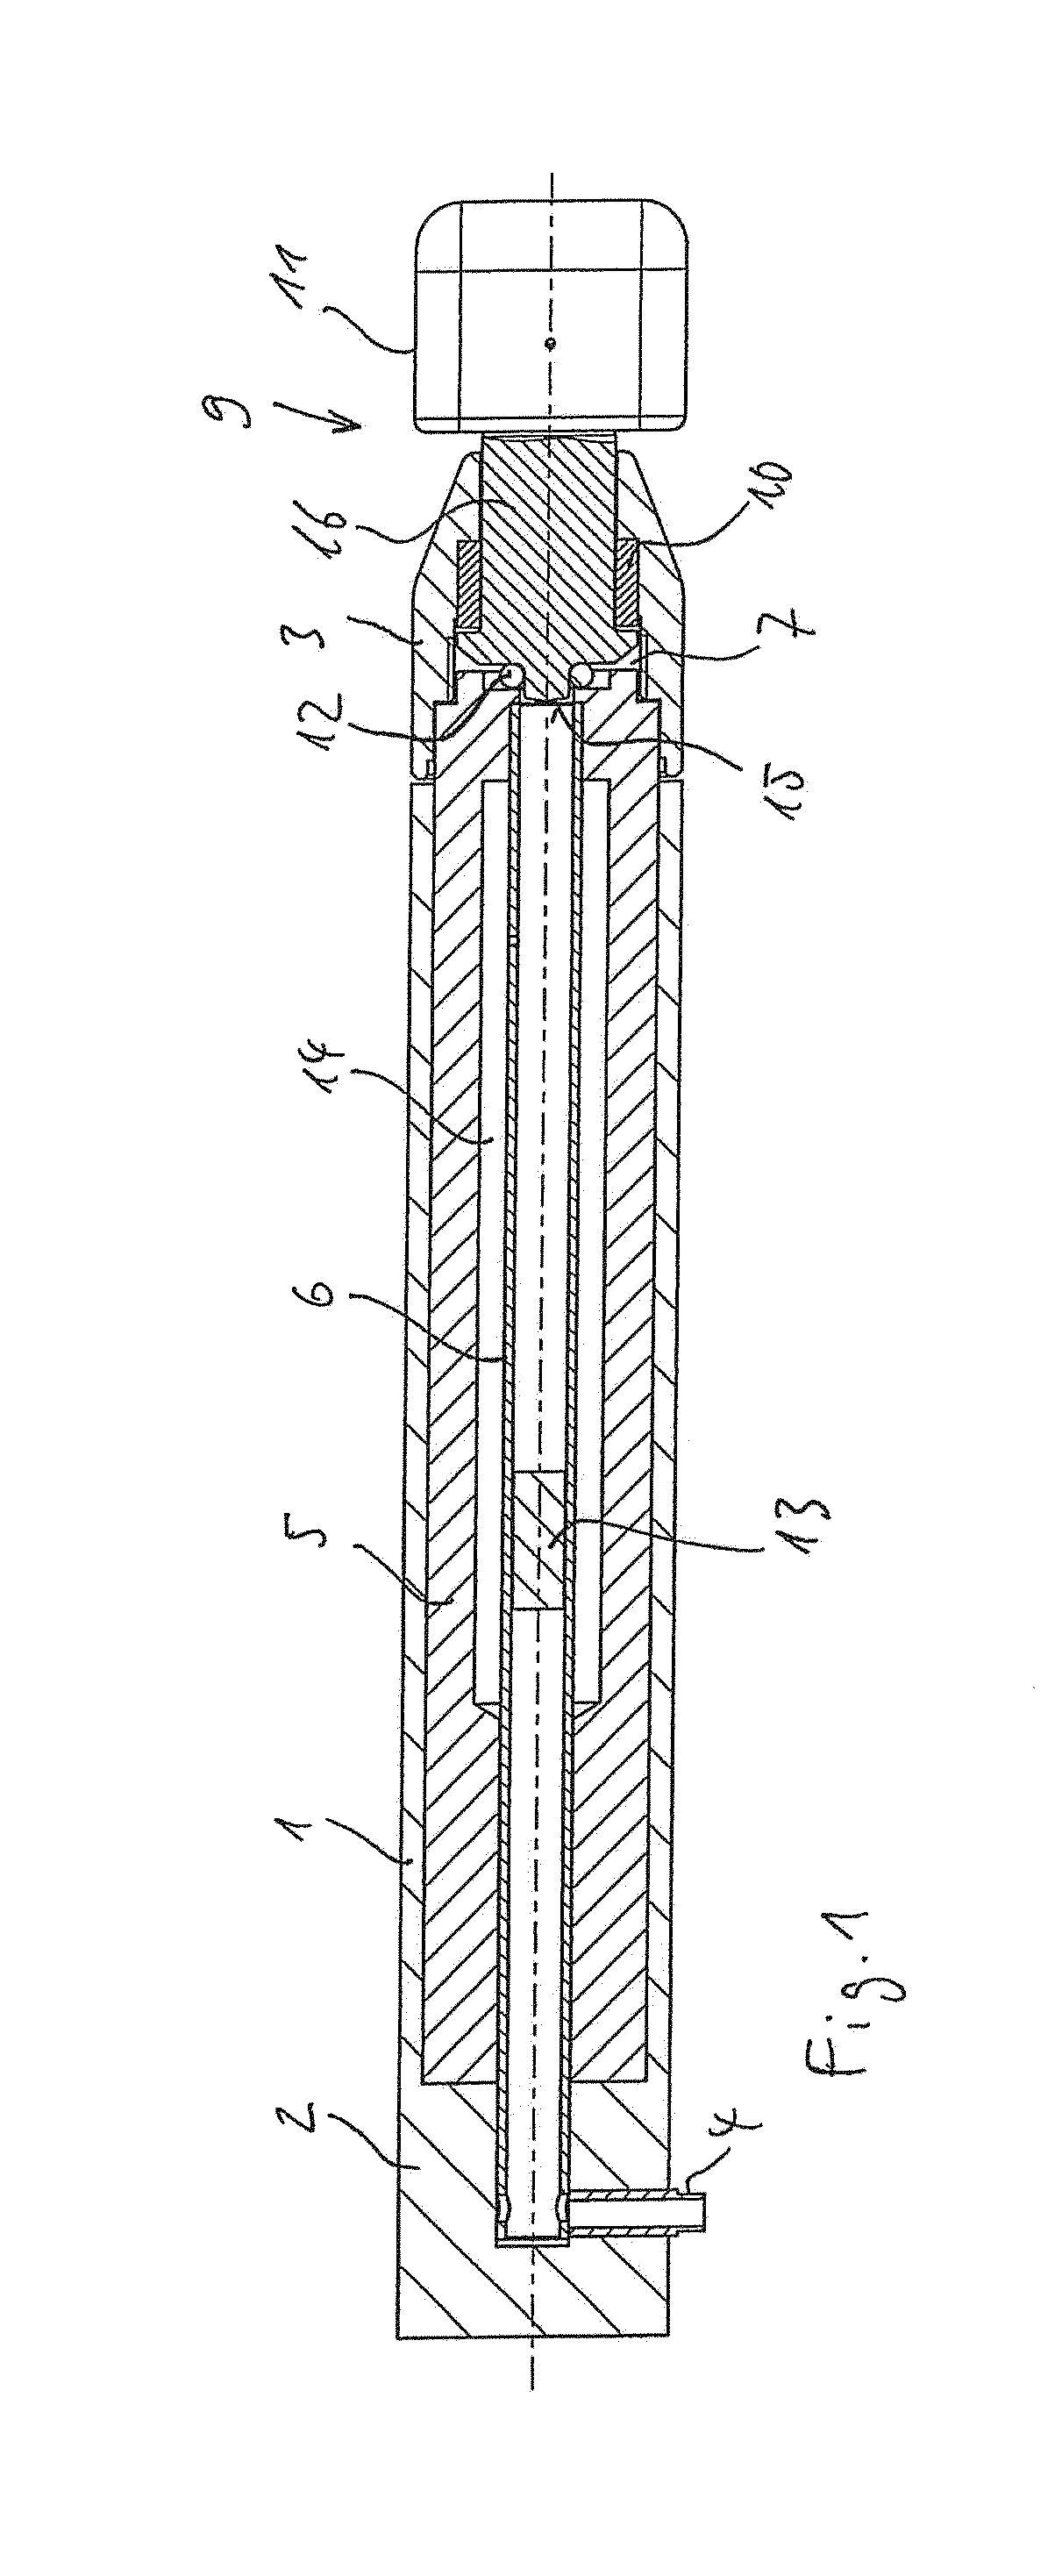 Apparatus for treating the human or animal body with mechanical strokes